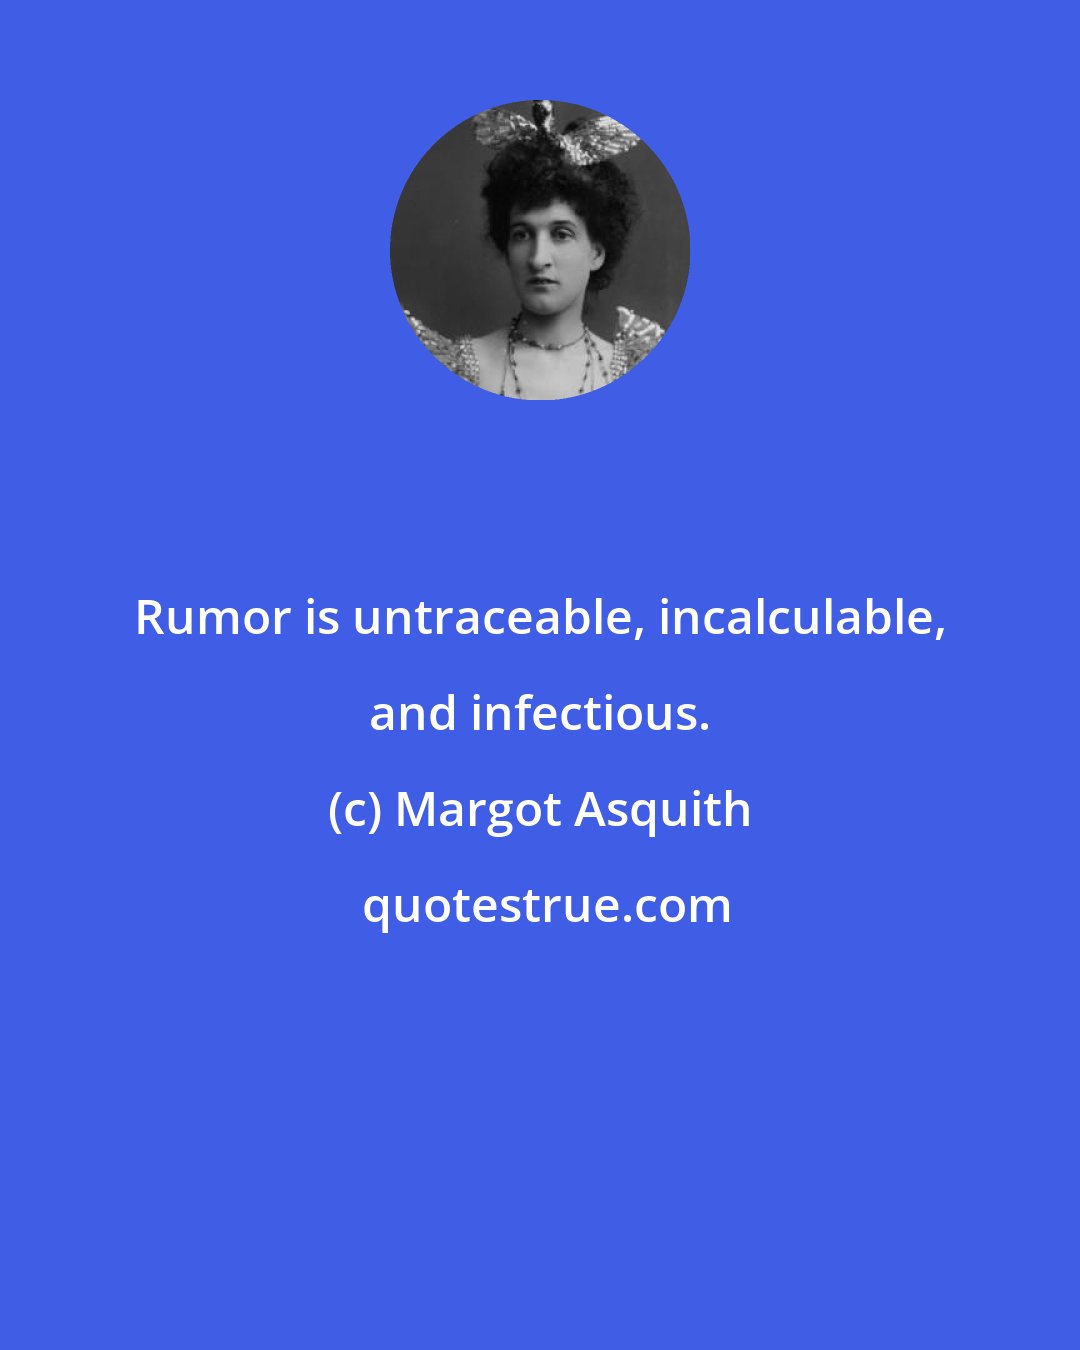 Margot Asquith: Rumor is untraceable, incalculable, and infectious.